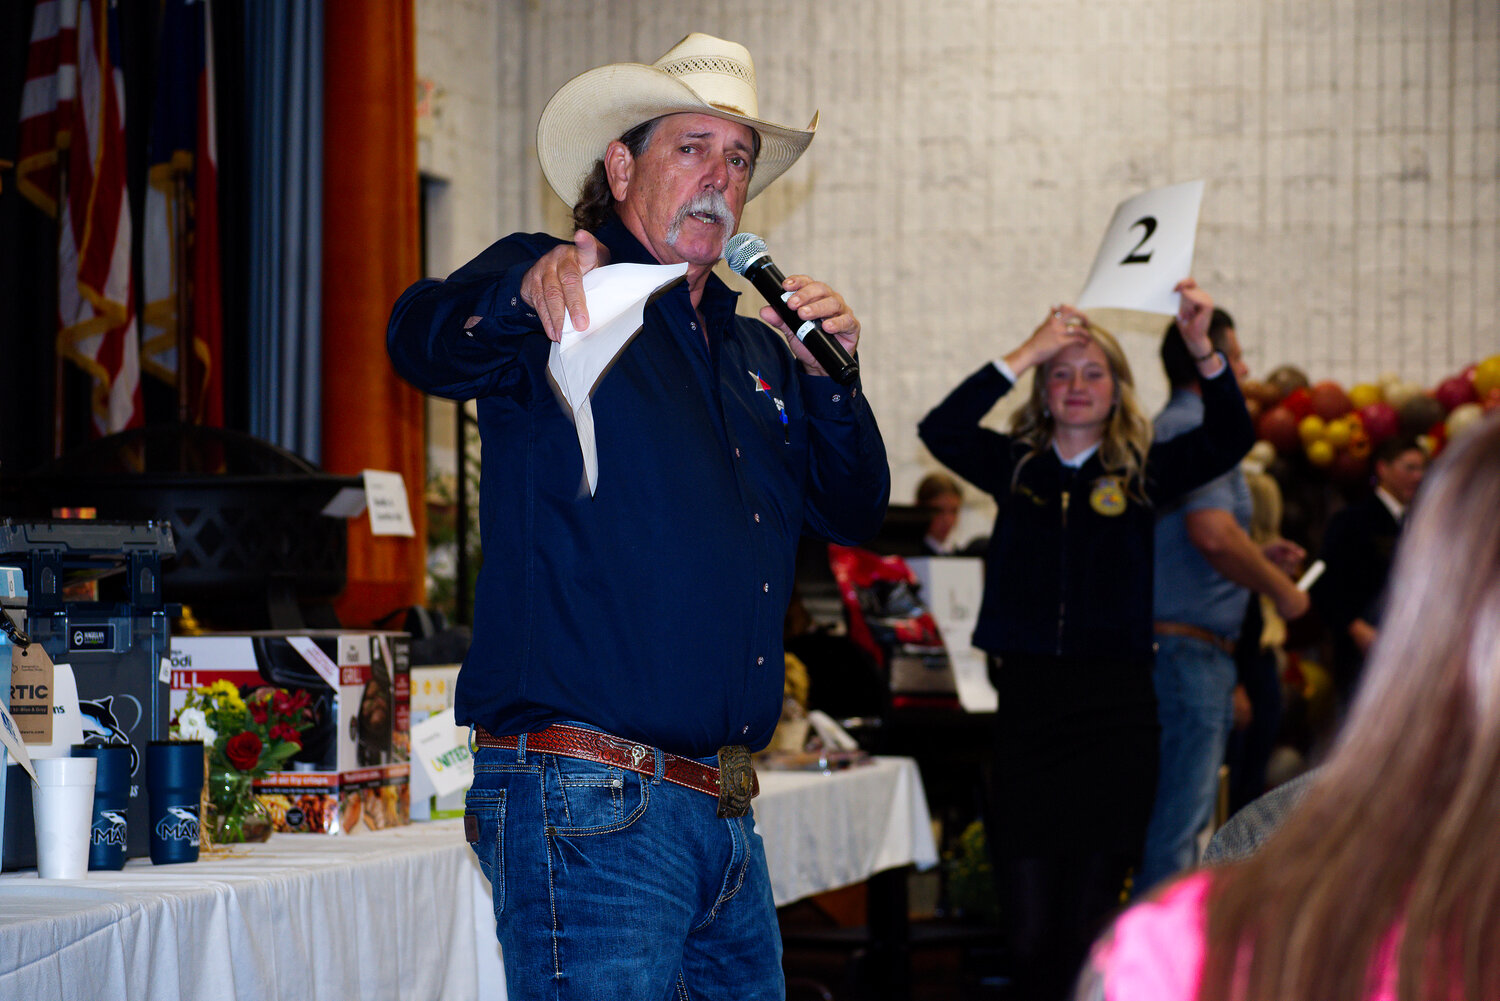 Kelly Conley reprised his role as auctioneer for the Mineola Hay Show Sept. 12.